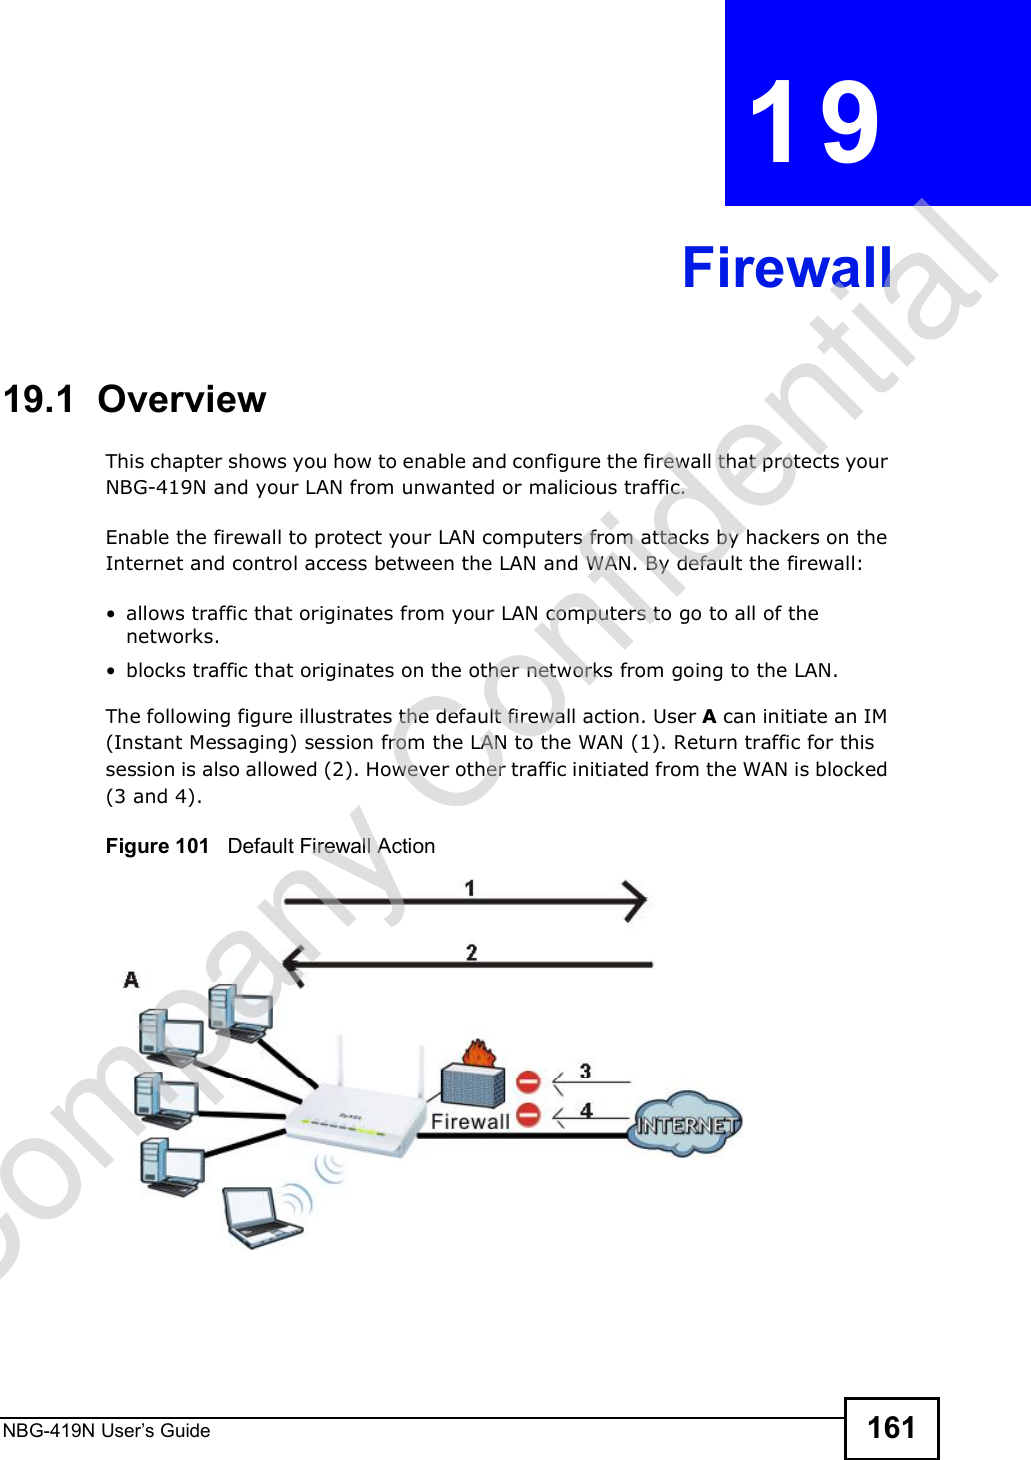 NBG-419N User s Guide 161CHAPTER  19  Firewall19.1  Overview   This chapter shows you how to enable and configure the firewall that protects your NBG-419N and your LAN from unwanted or malicious traffic.Enable the firewall to protect your LAN computers from attacks by hackers on the Internet and control access between the LAN and WAN. By default the firewall: allows traffic that originates from your LAN computers to go to all of the networks.  blocks traffic that originates on the other networks from going to the LAN. The following figure illustrates the default firewall action. User A can initiate an IM (Instant Messaging) session from the LAN to the WAN (1). Return traffic for this session is also allowed (2). However other traffic initiated from the WAN is blocked (3 and 4).Figure 101   Default Firewall ActionCompany Confidential